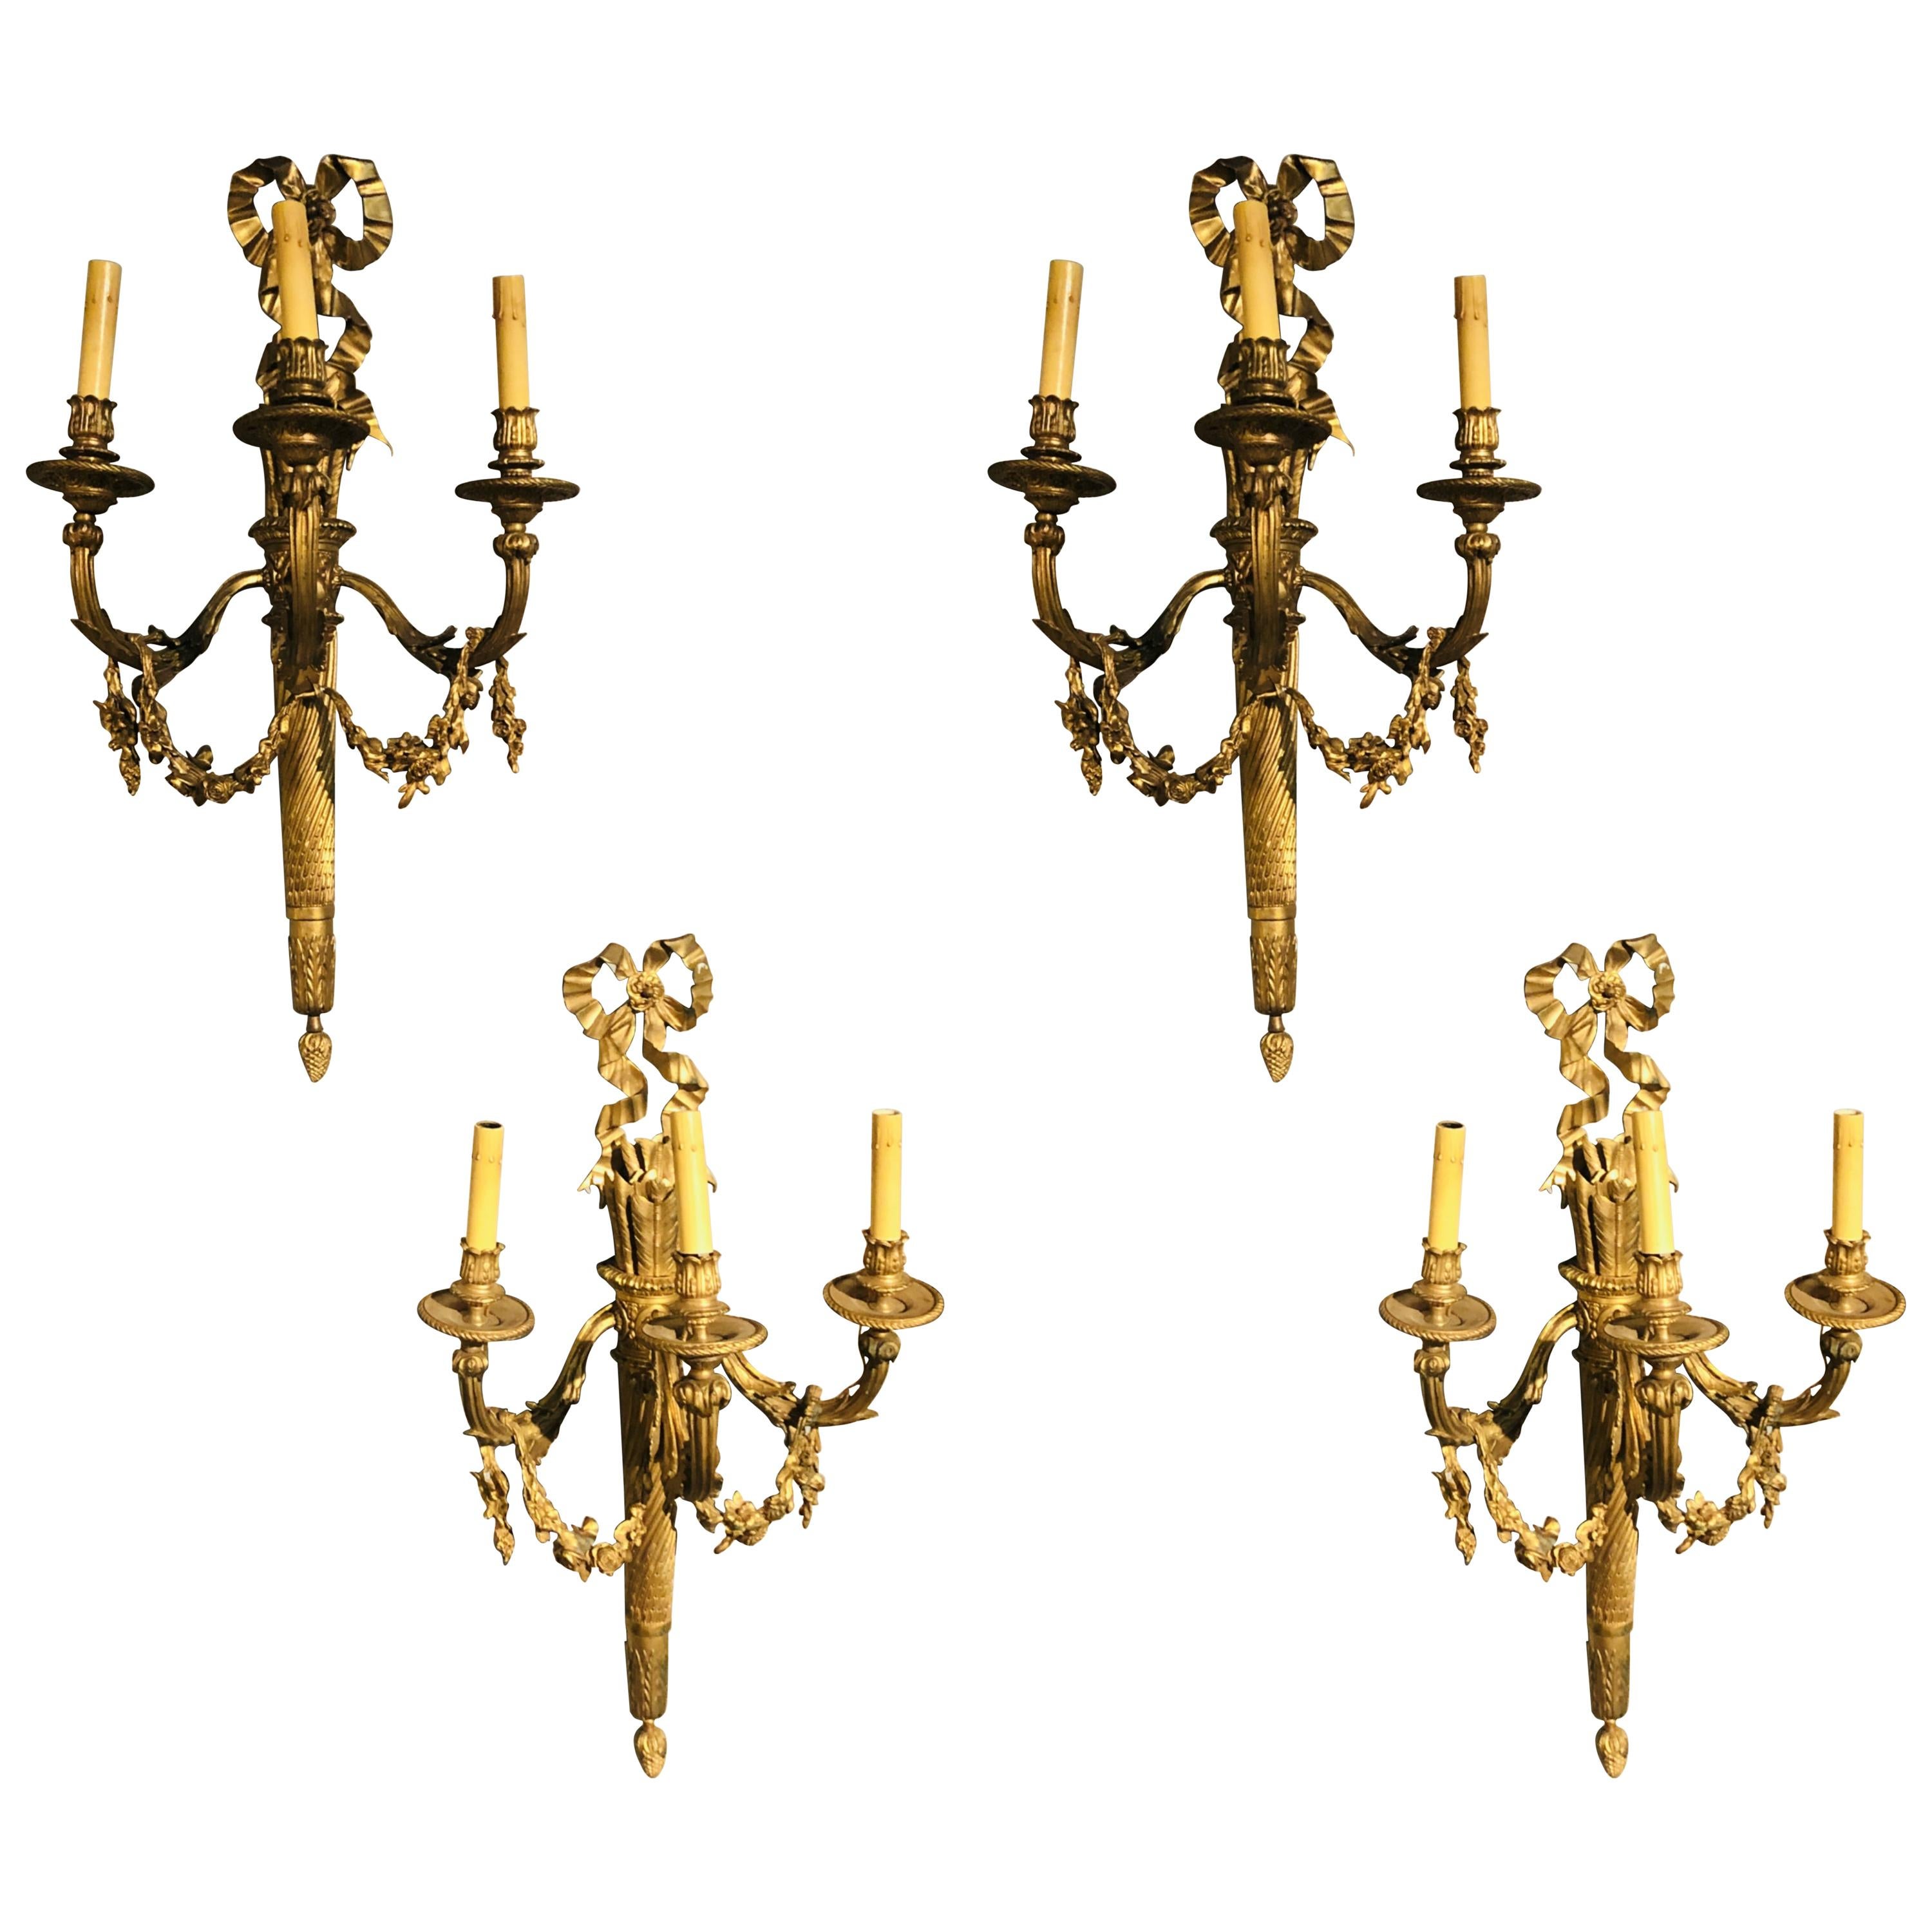 Set of Four Large Ornate Three-Light Torch and Ribbon Form Wall Sconces